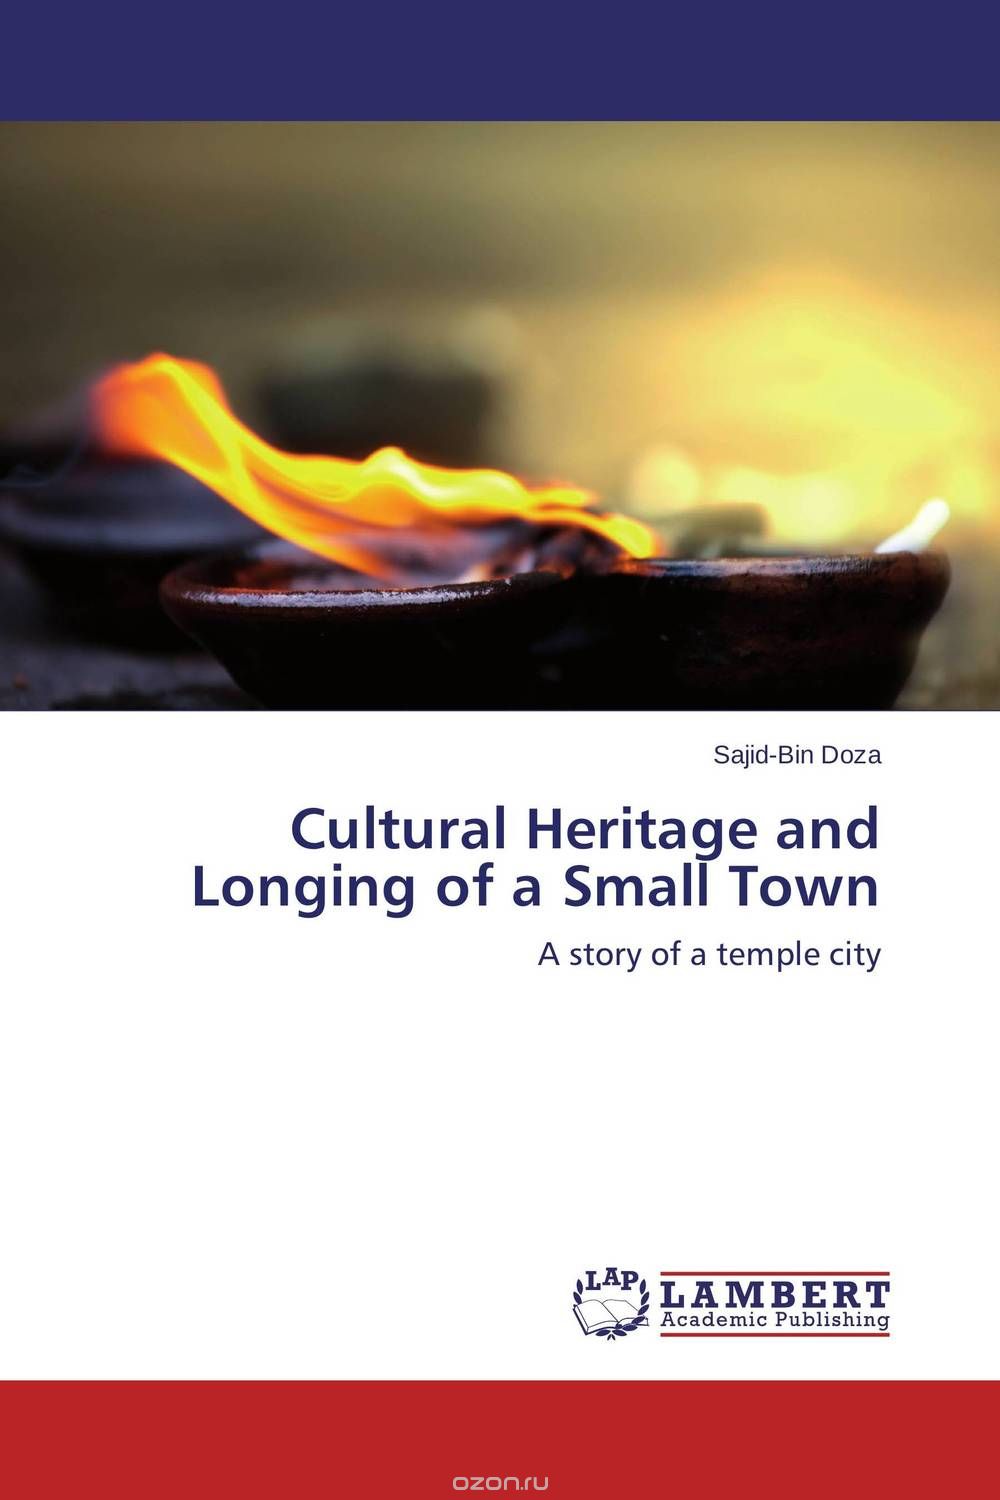 Скачать книгу "Cultural Heritage and Longing of a Small Town"